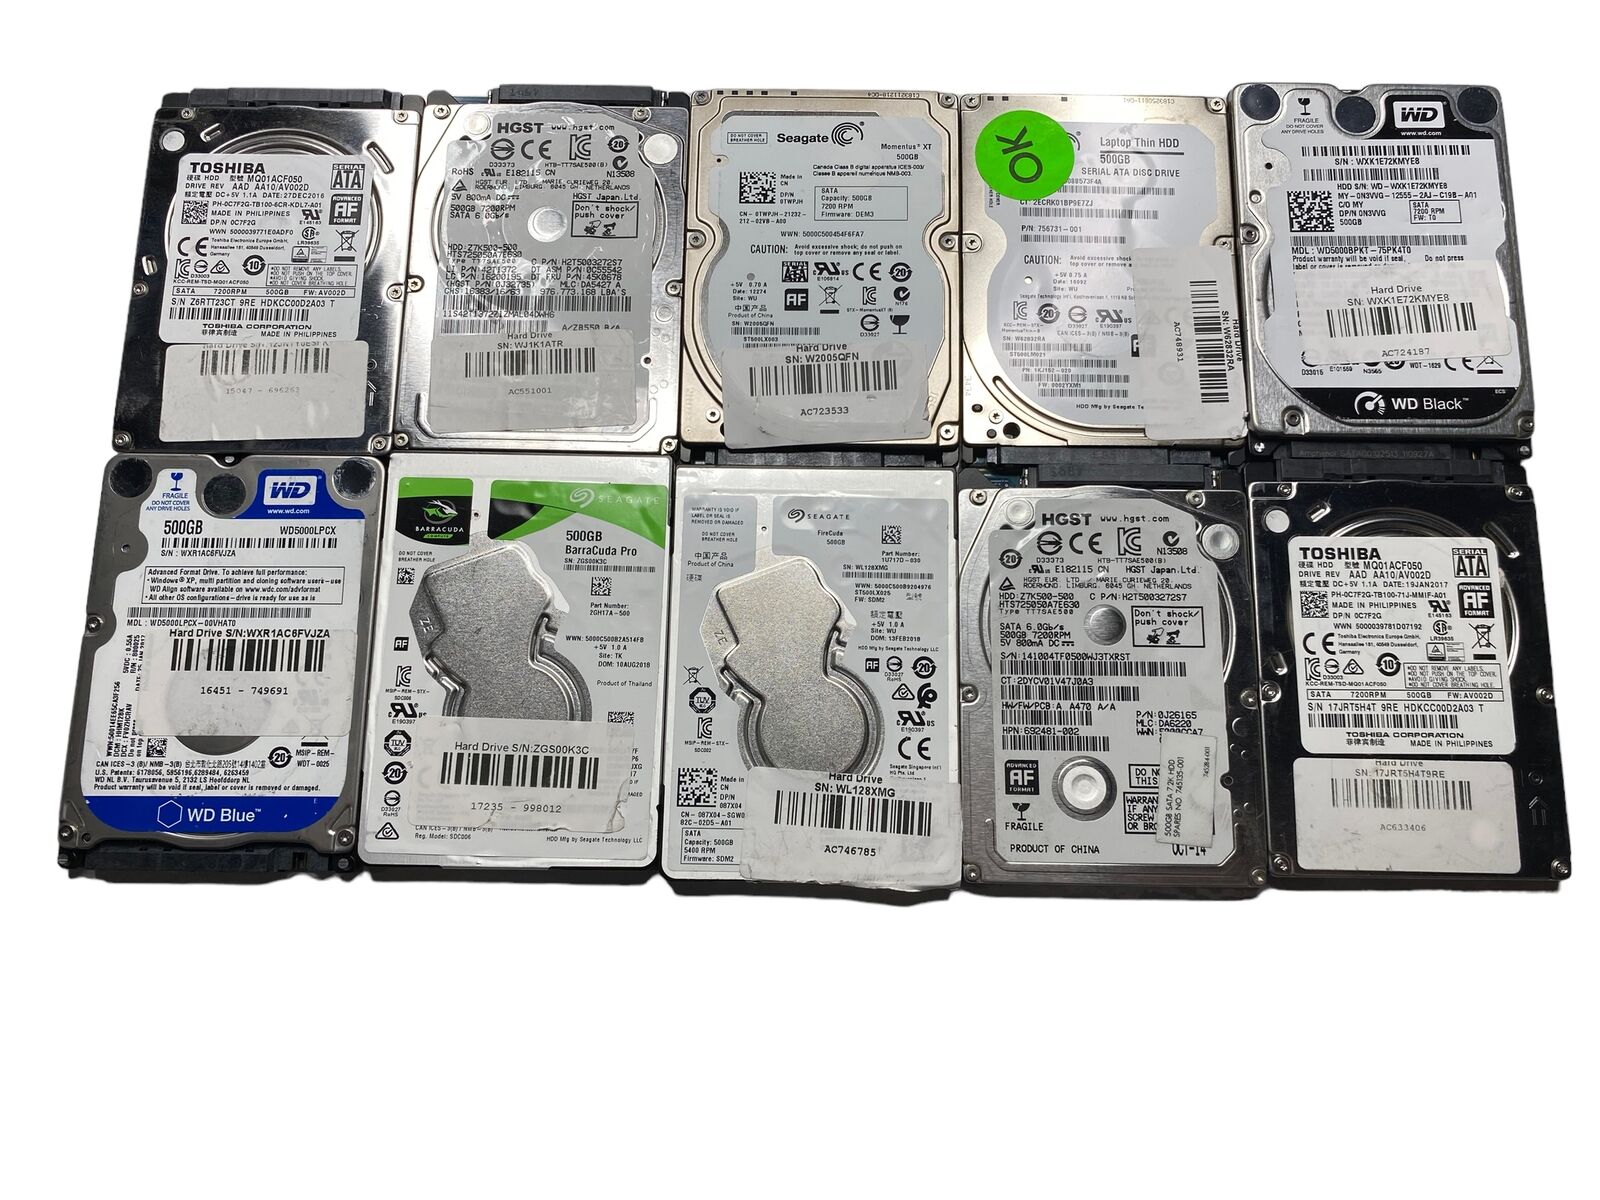 Lot of 10 Mixed Brand Model 500GB 2.5